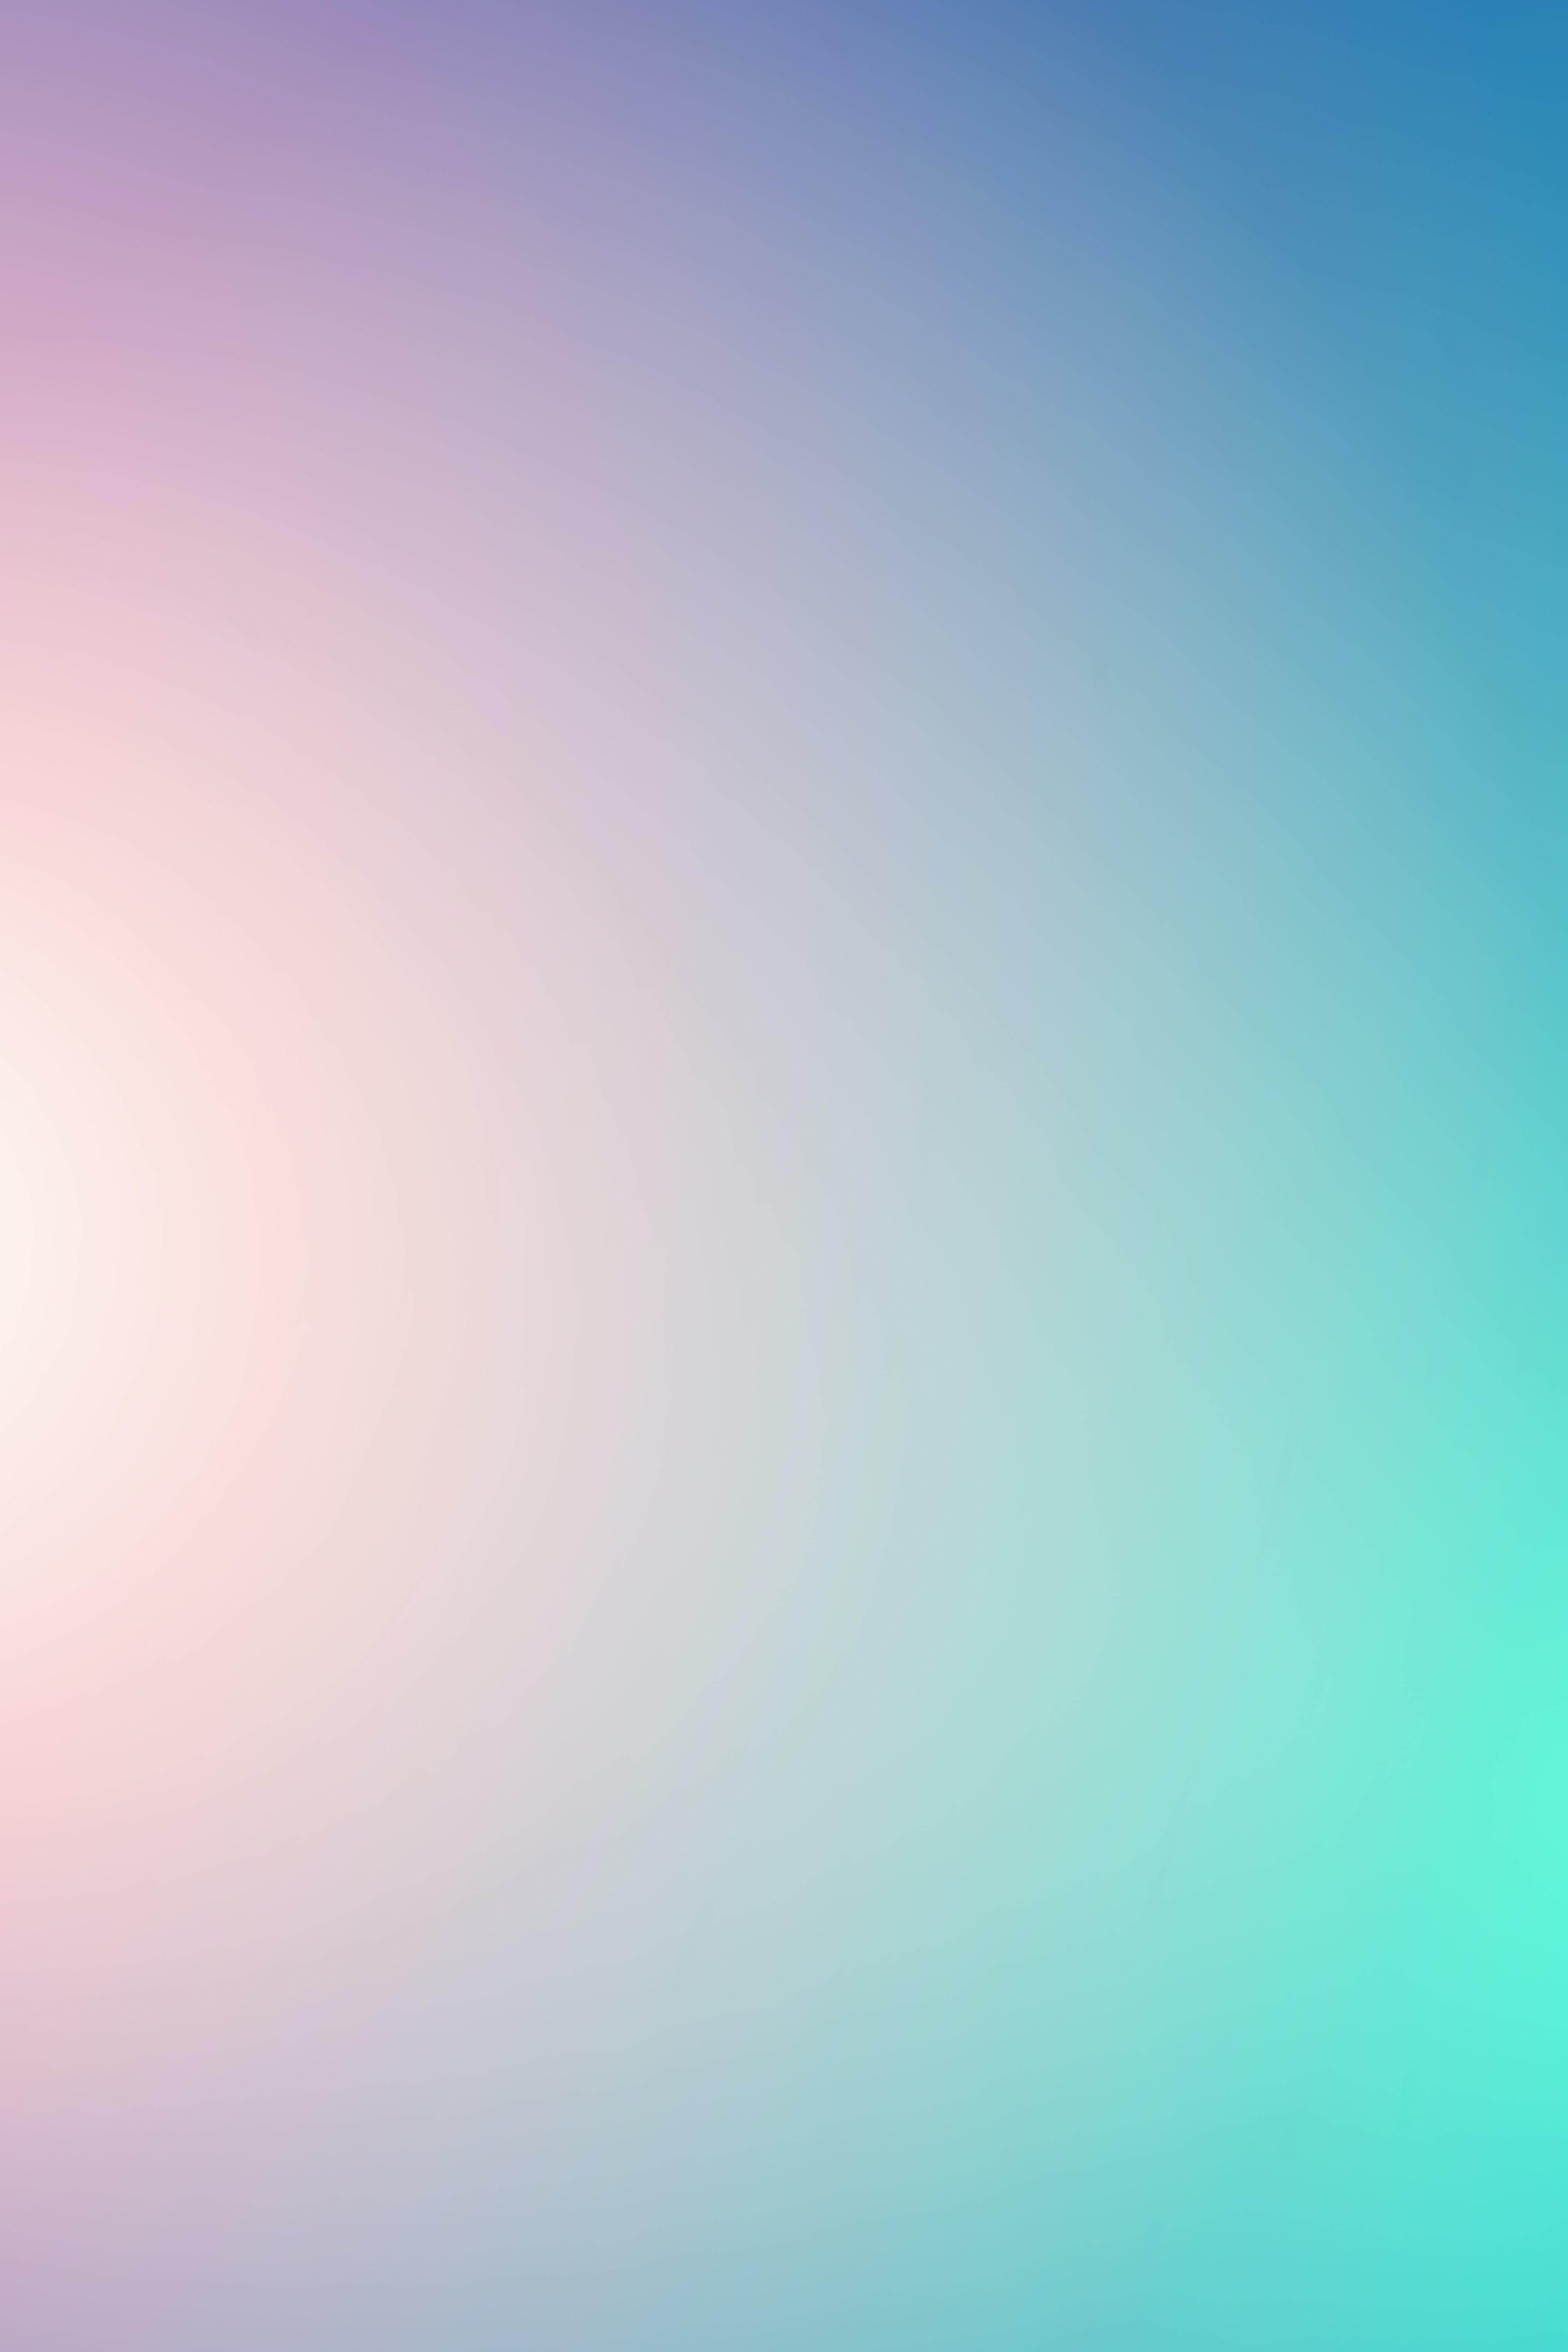 multicolored, gradient, motley, tender, abstract Aesthetic wallpaper